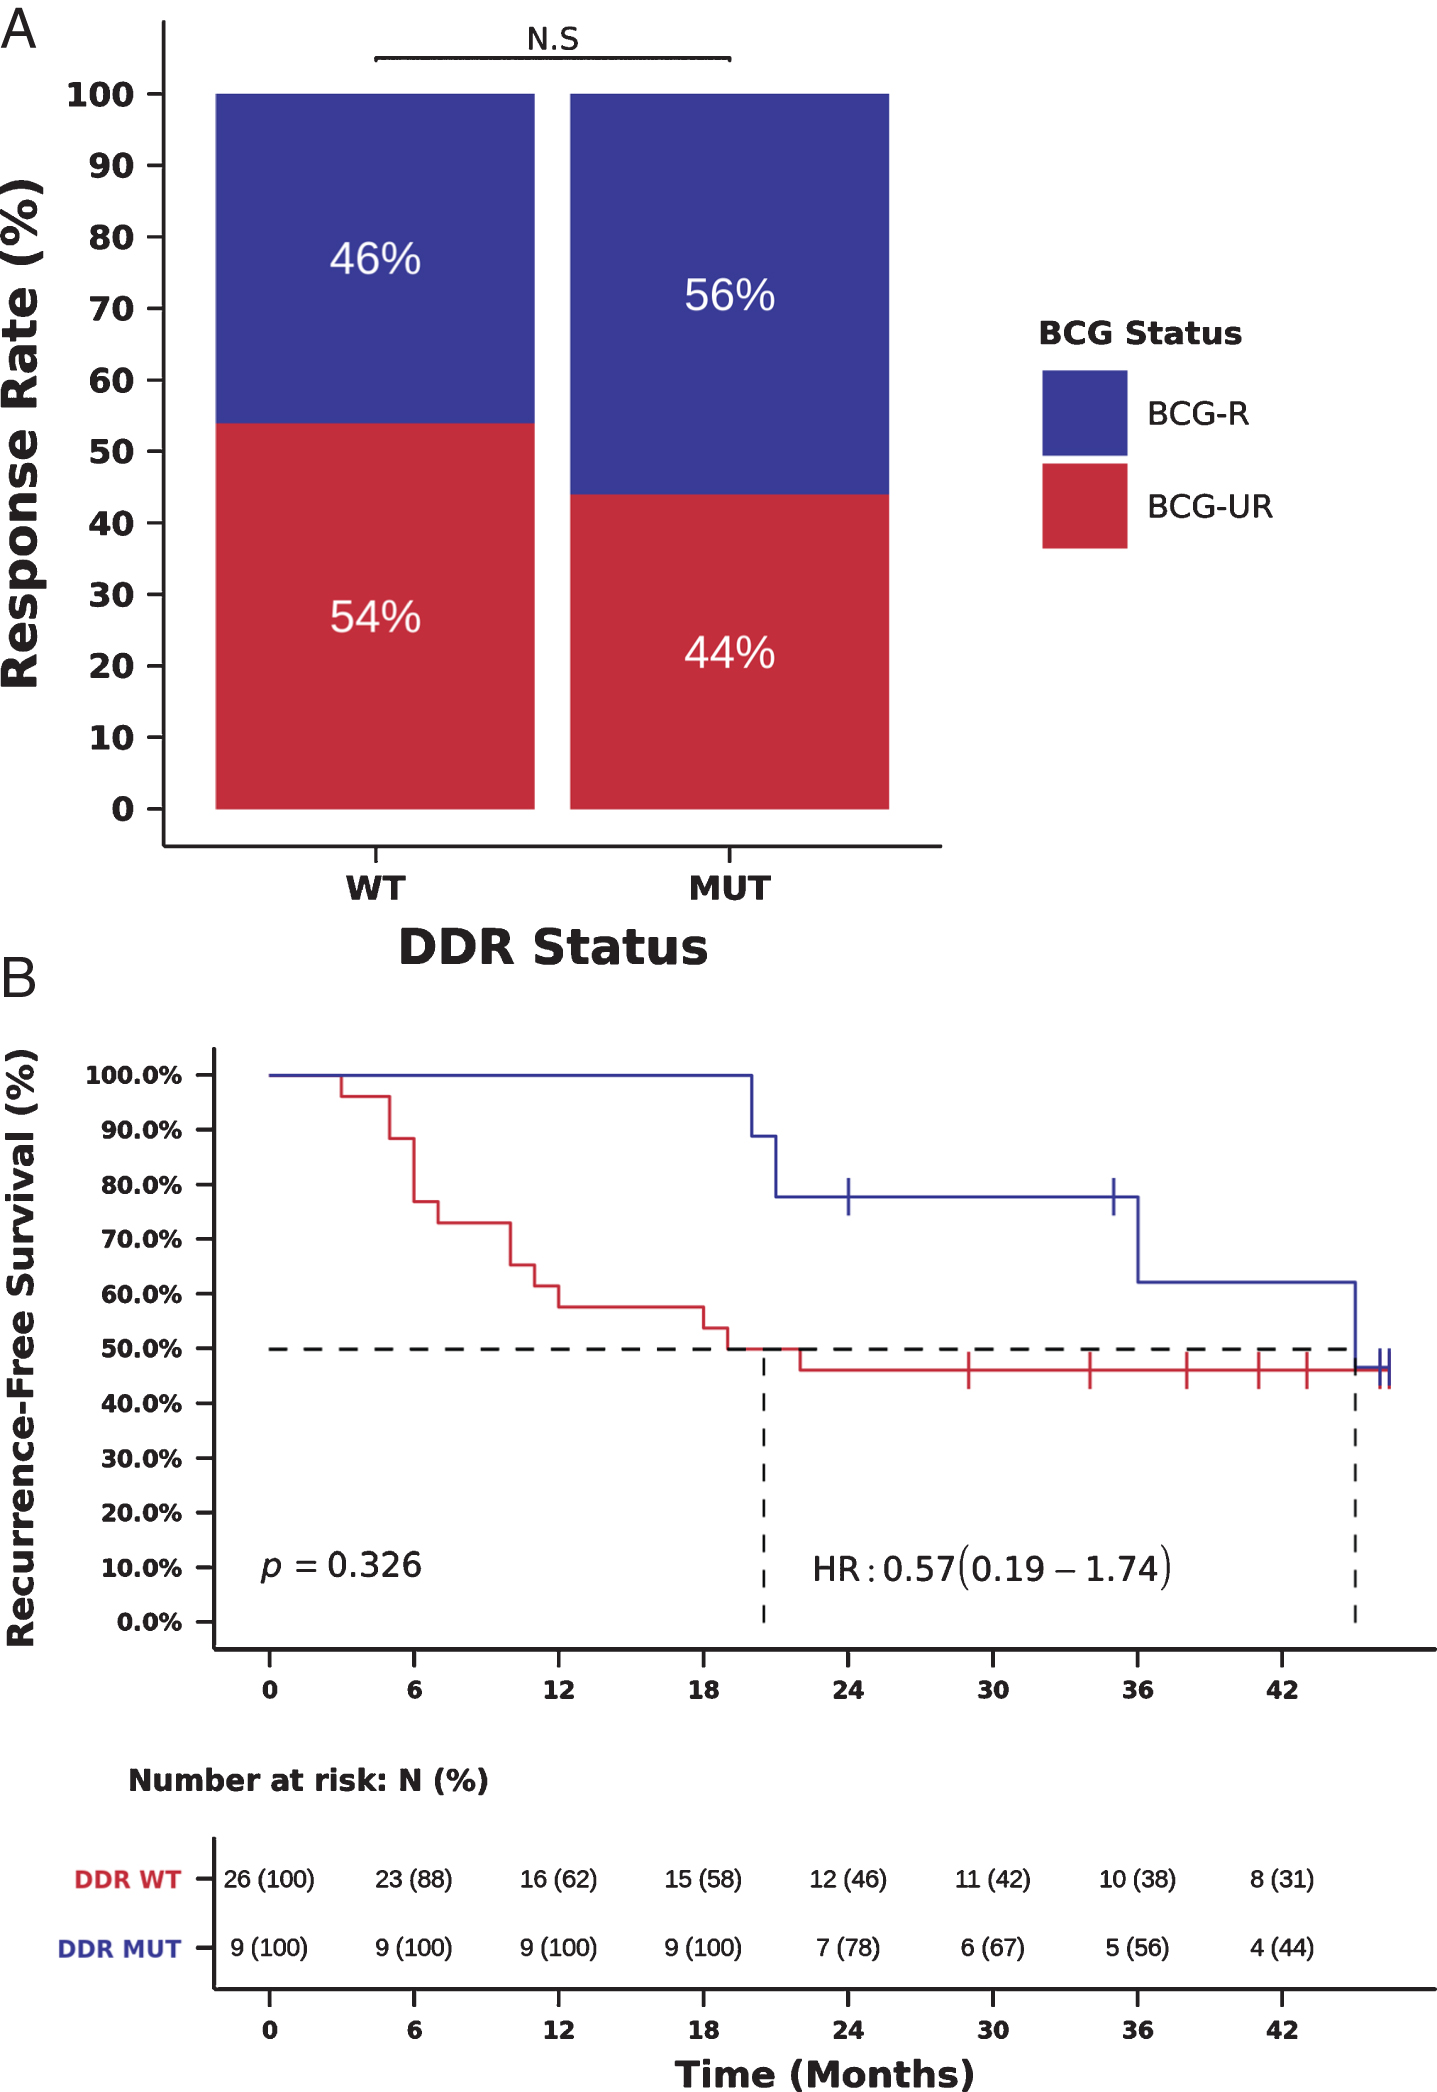 Mutations in DDR genes (34 gene list) and benefit from BCG immunotherapy. (A) BCG response rate in patients harboring tumors with deleterious mutations in DDR genes (DDR-MUT) compared to tumors with wild-type DDR genes (DDR-WT). (RR DDR-MUT=56% vs. DDR-WT=46%, OR = 1.58, 95%, CI: 0.32-6.70, Chi-Square p = 0.711) (B) Kaplan-Meier curve for recurrence-free survival after BCG immunotherapy for patients harboring tumors with deleterious mutations in DDR genes (DDR-MUT) compared to tumors with wild-type DDR genes (DDR-WT). (RFS DDR-MUT=36.0 vs. DDR-WT=20.0 months, HR = 0.57, 95% CI: 0.19-1.74, Log-rank p = 0.326).